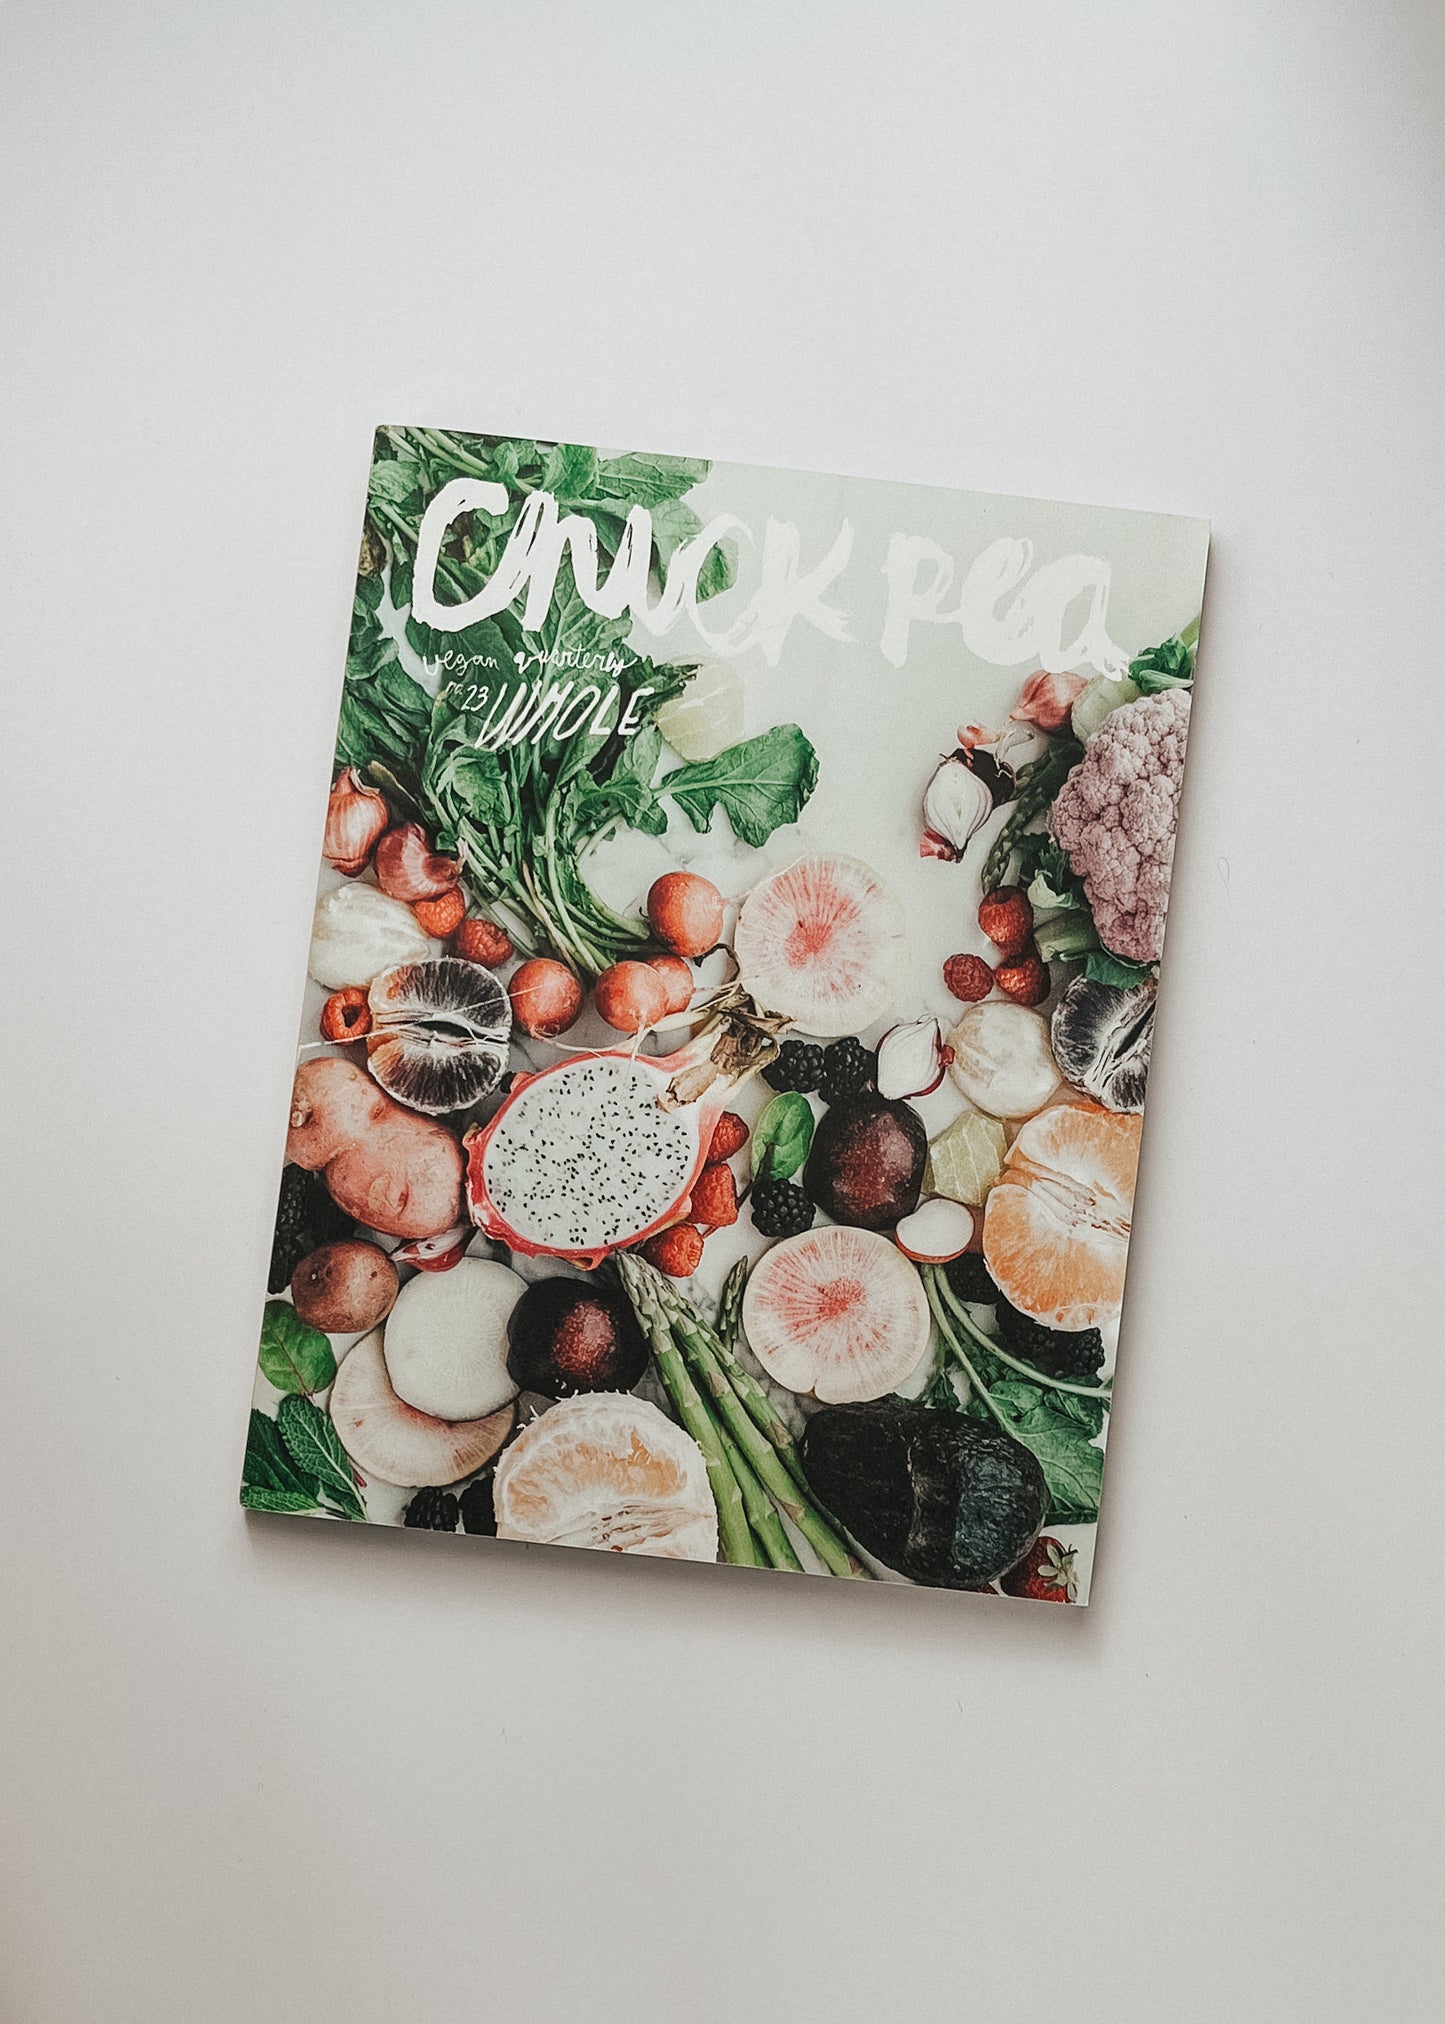 Issue 23: Whole